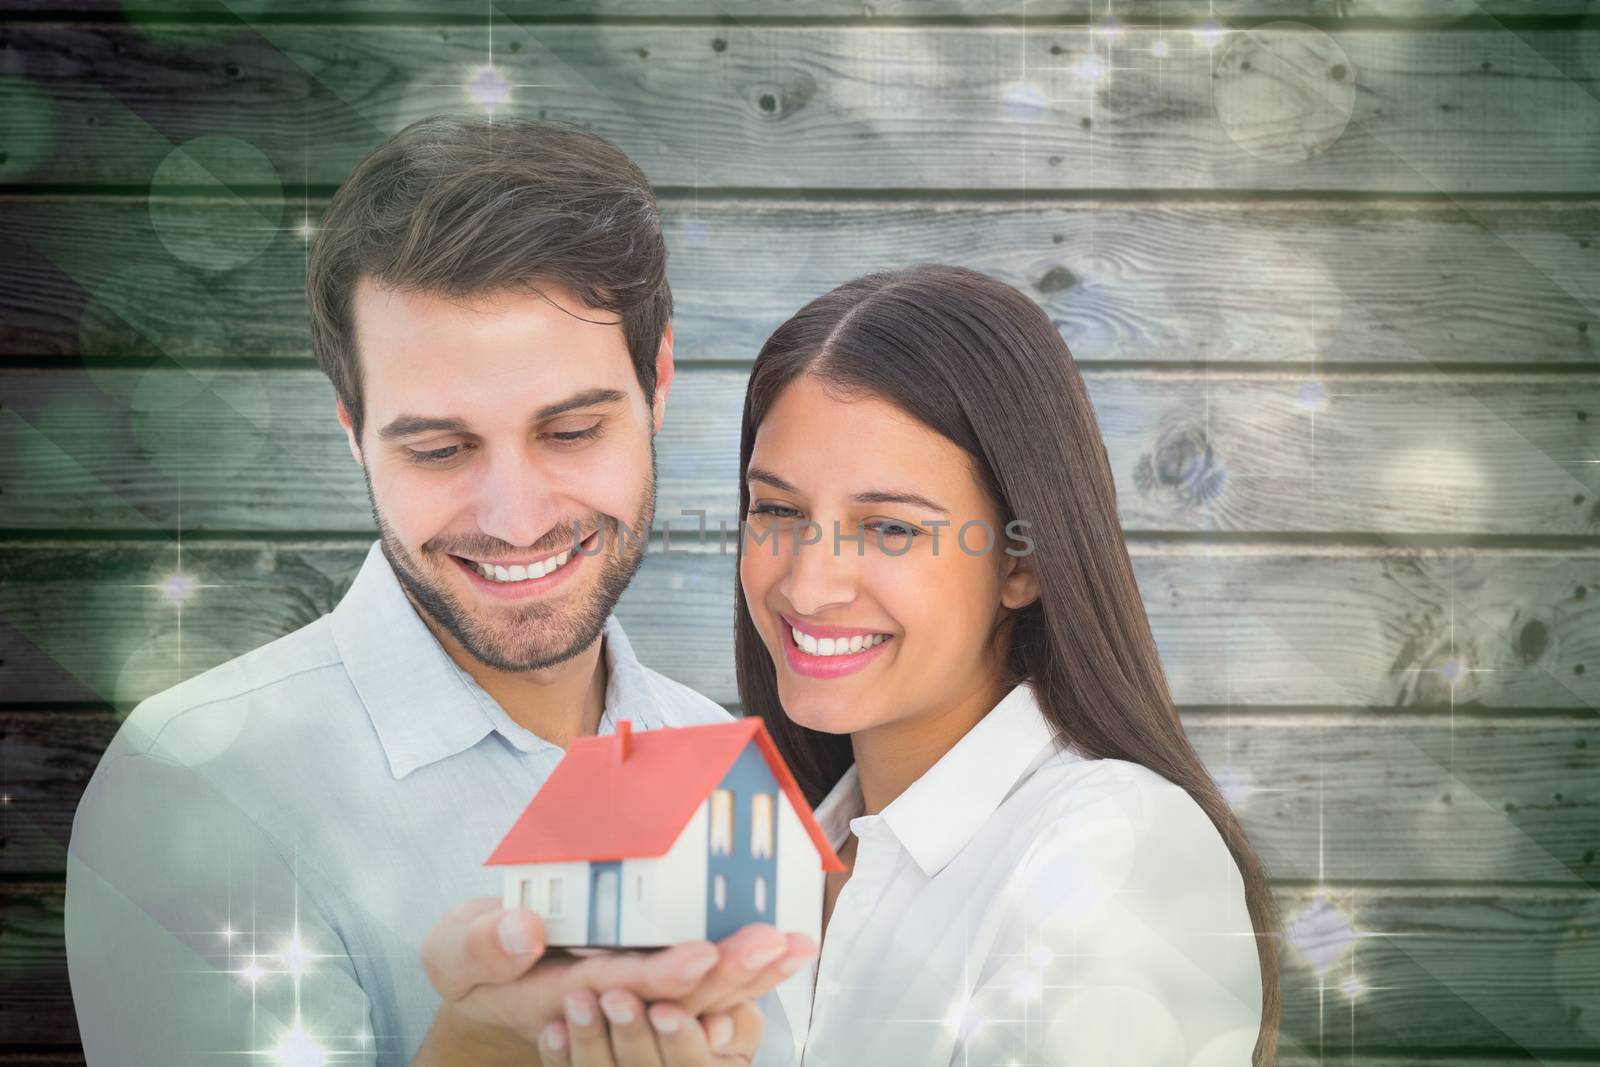 Composite image of attractive young couple holding a model house by Wavebreakmedia